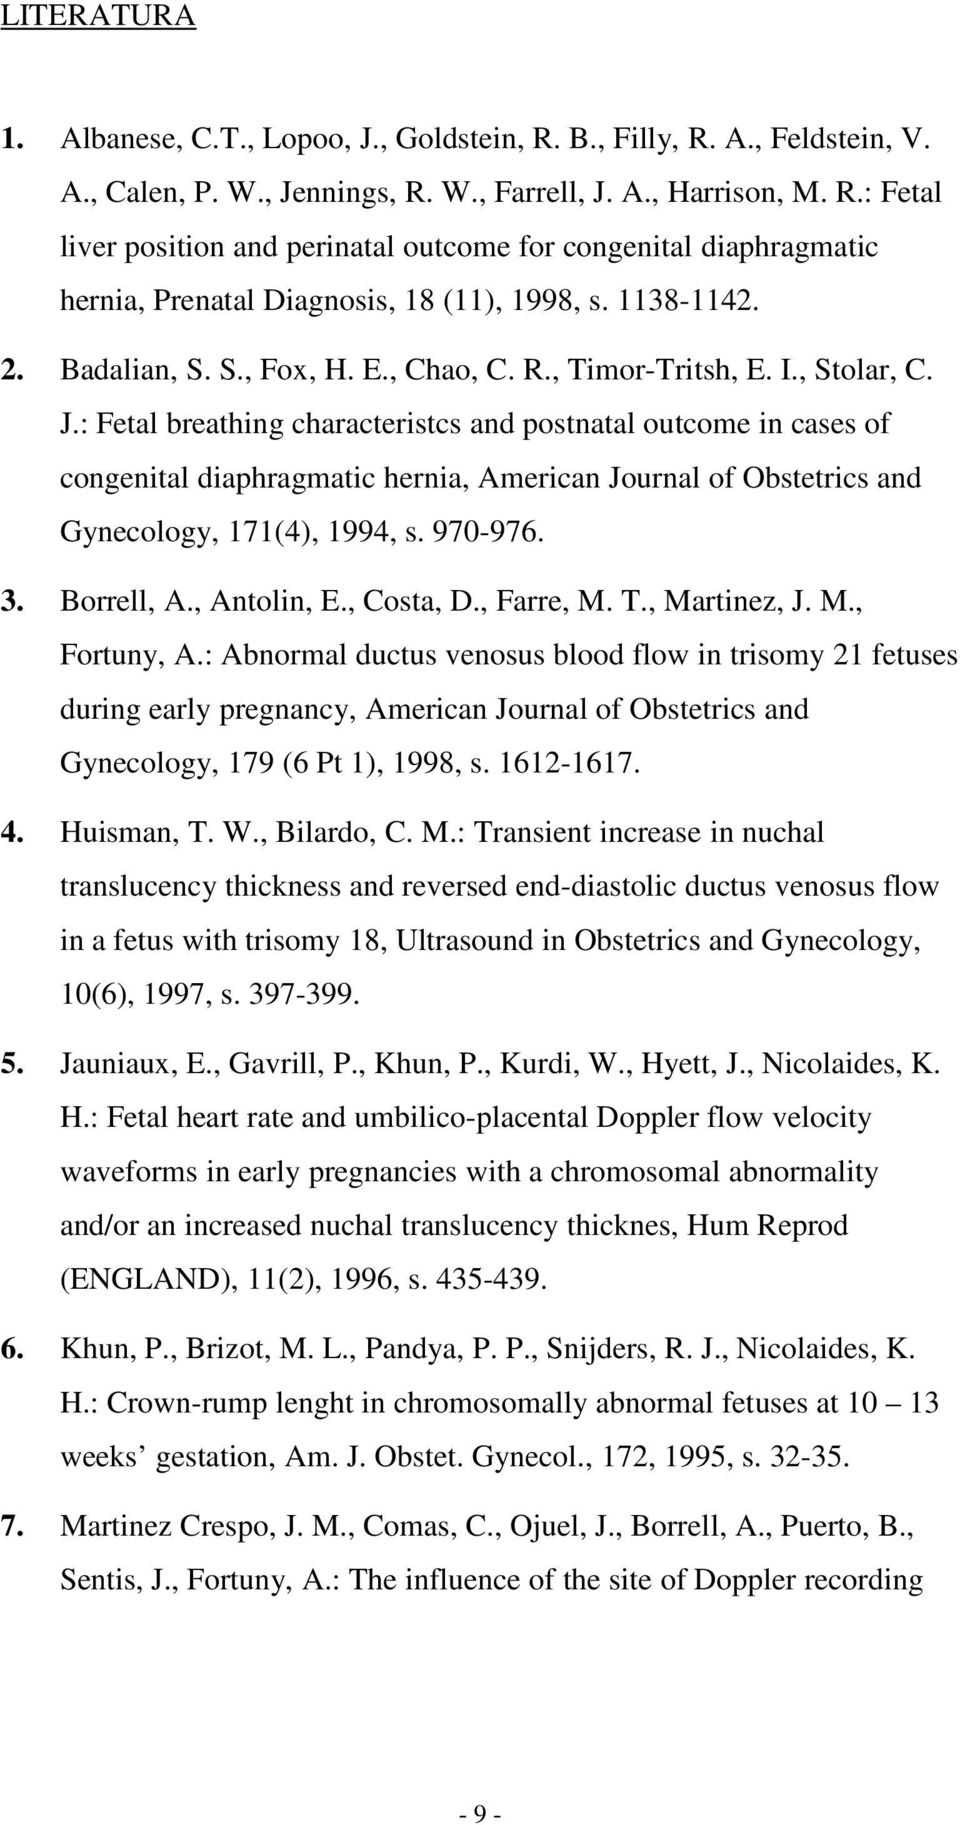 : Fetal breathing characteristcs and postnatal outcome in cases of congenital diaphragmatic hernia, American Journal of Obstetrics and Gynecology, 171(4), 1994, s. 970-976. 3. Borrell, A., Antolin, E.